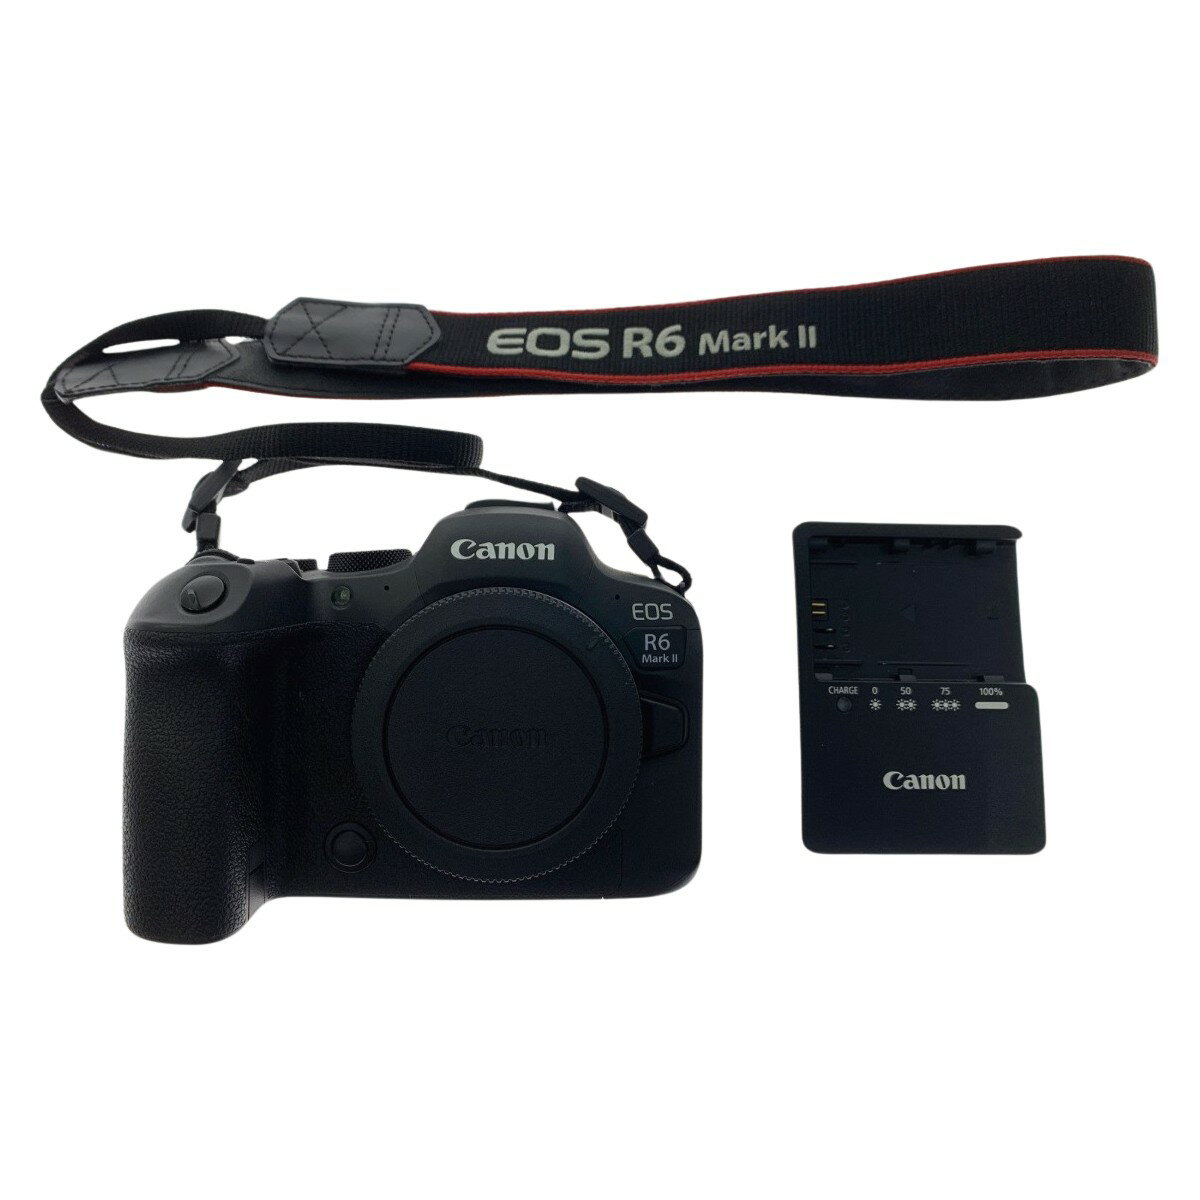 ▽▽【<strong>中古</strong>】CANON <strong>キヤノン</strong> EOS R6 MarkII <strong>フルサイズ</strong>ミラーレスカメラ <strong>ボディ</strong> Bランク